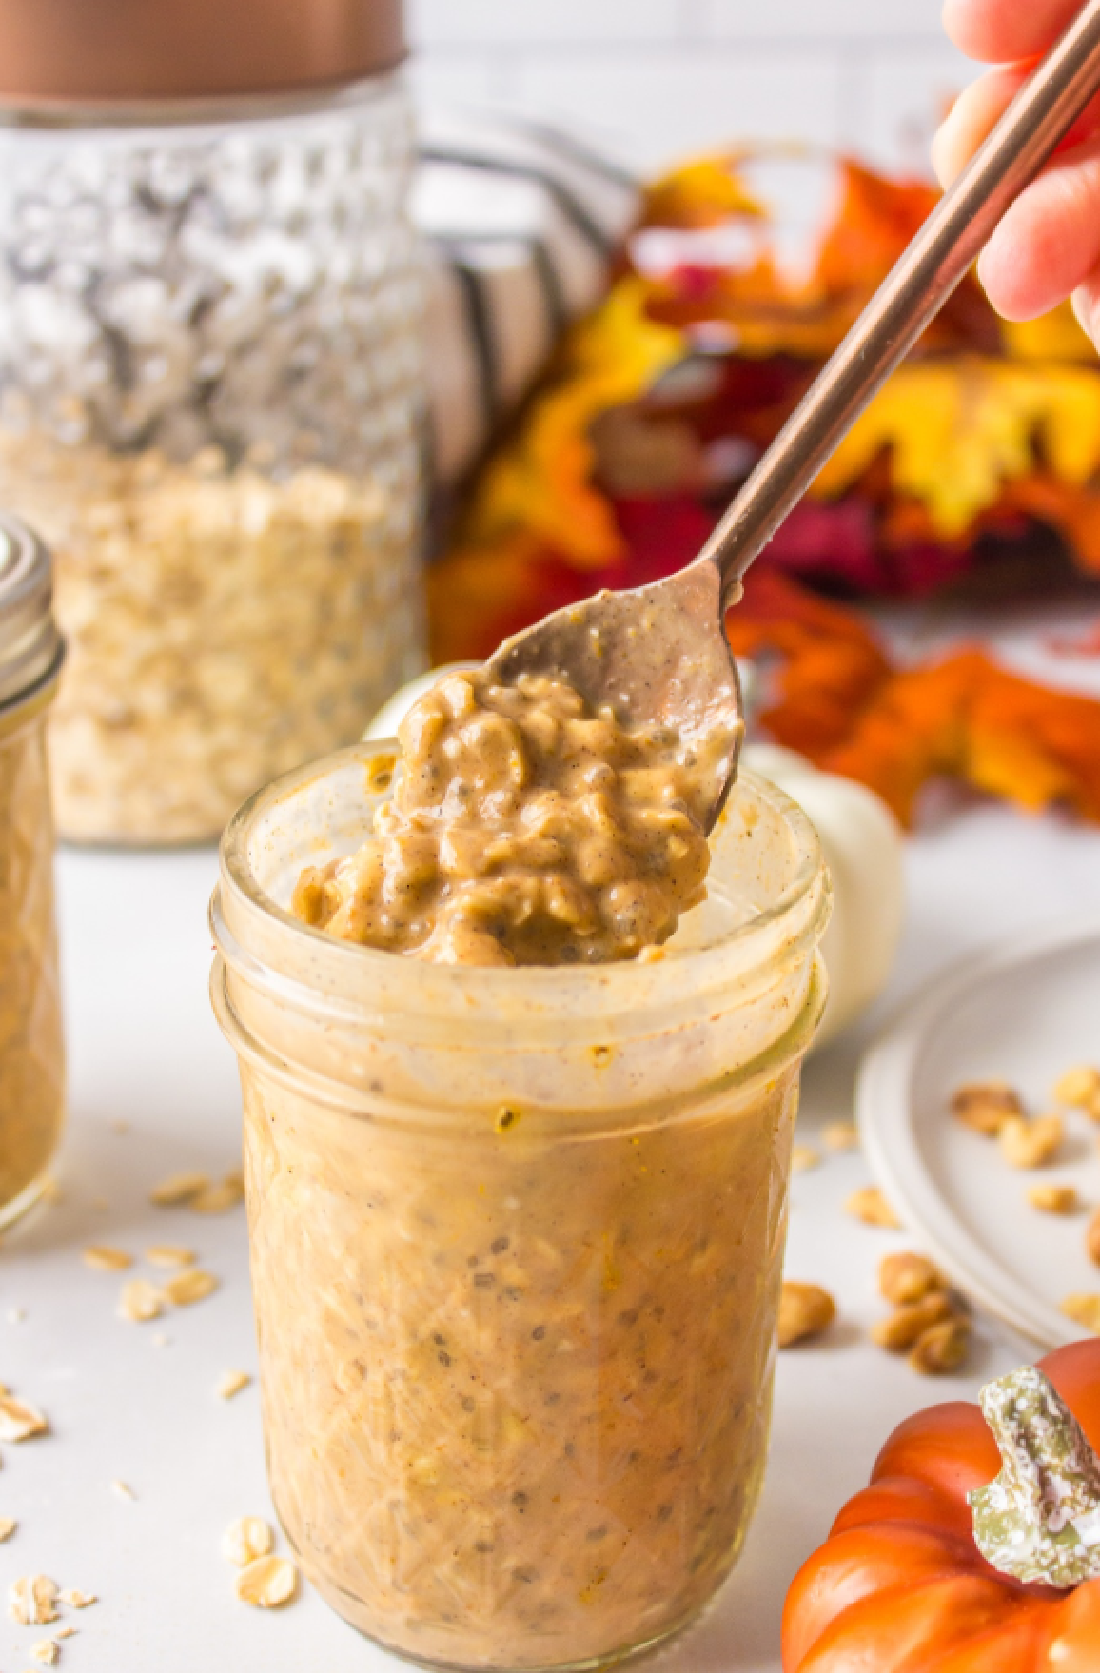 A spoonful of pumpkin spiced overnight oats is a healthy quick and convenient breakfast